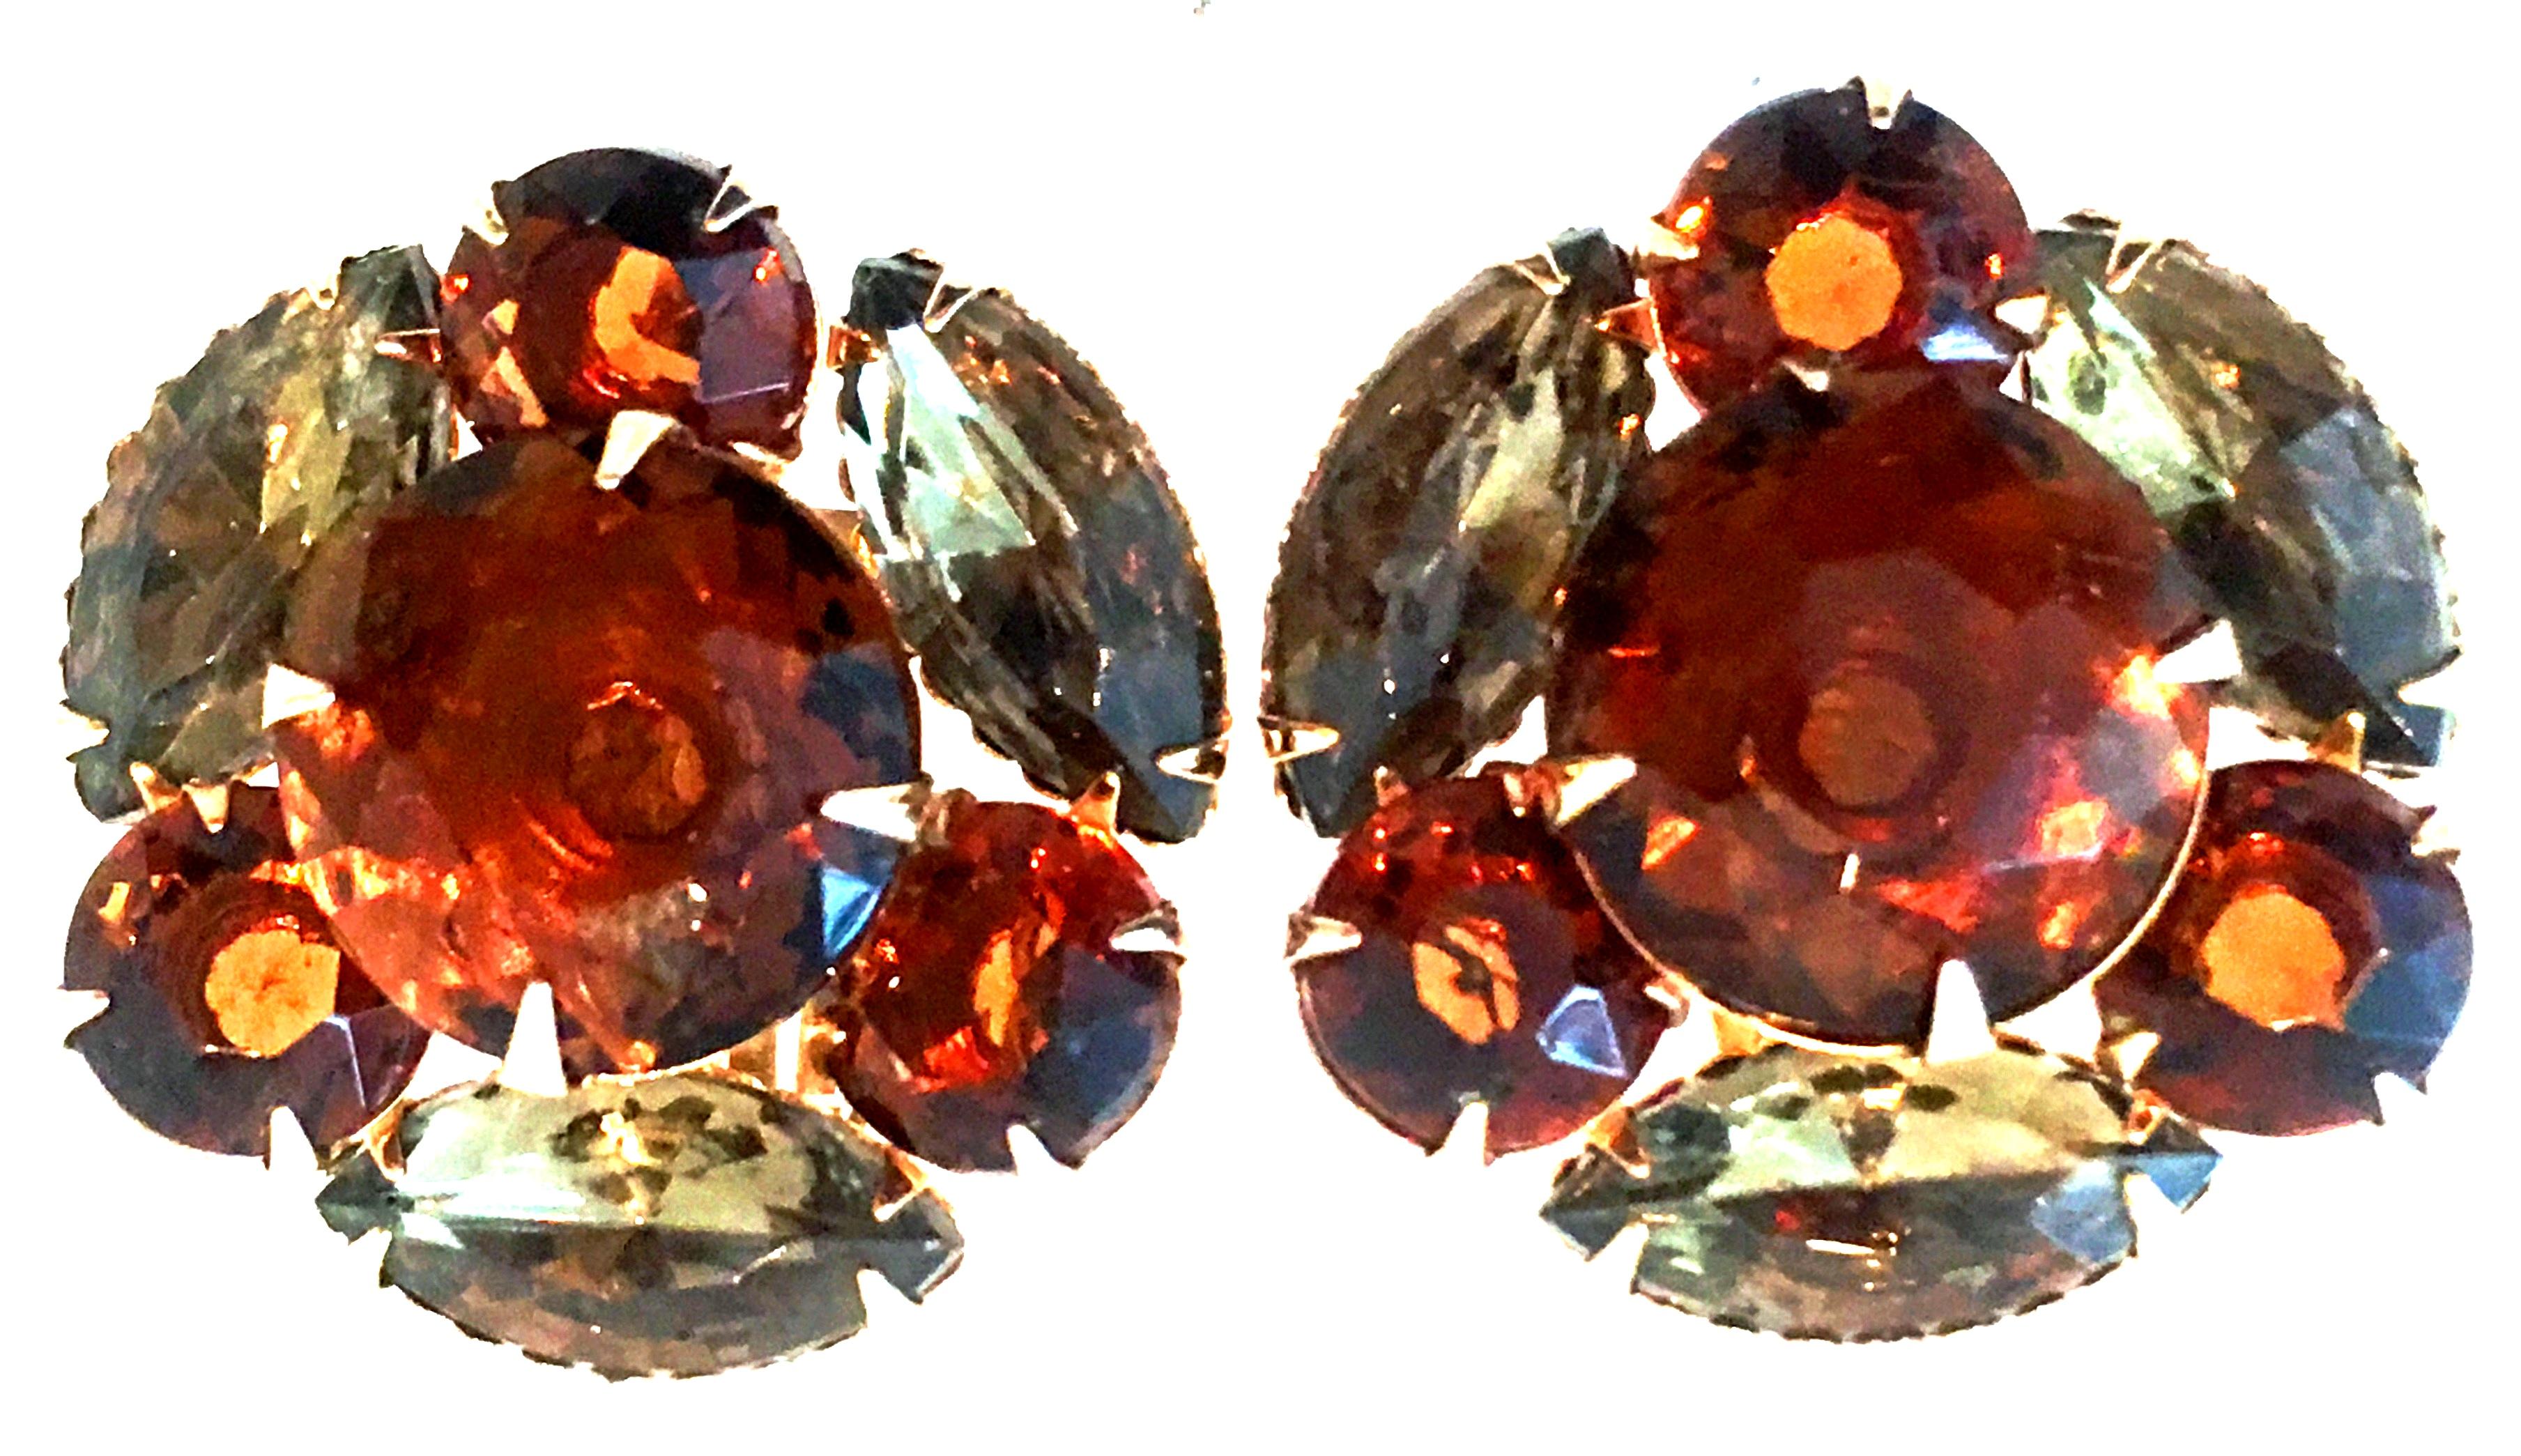 Mid-20th Century Pair Of Gold & Austrian Crystal Dimensional Earrings. These finely crafted gold plate earrings feature fancy prong set brilliant cut and faceted amber and topaz Austrian crystal stones.